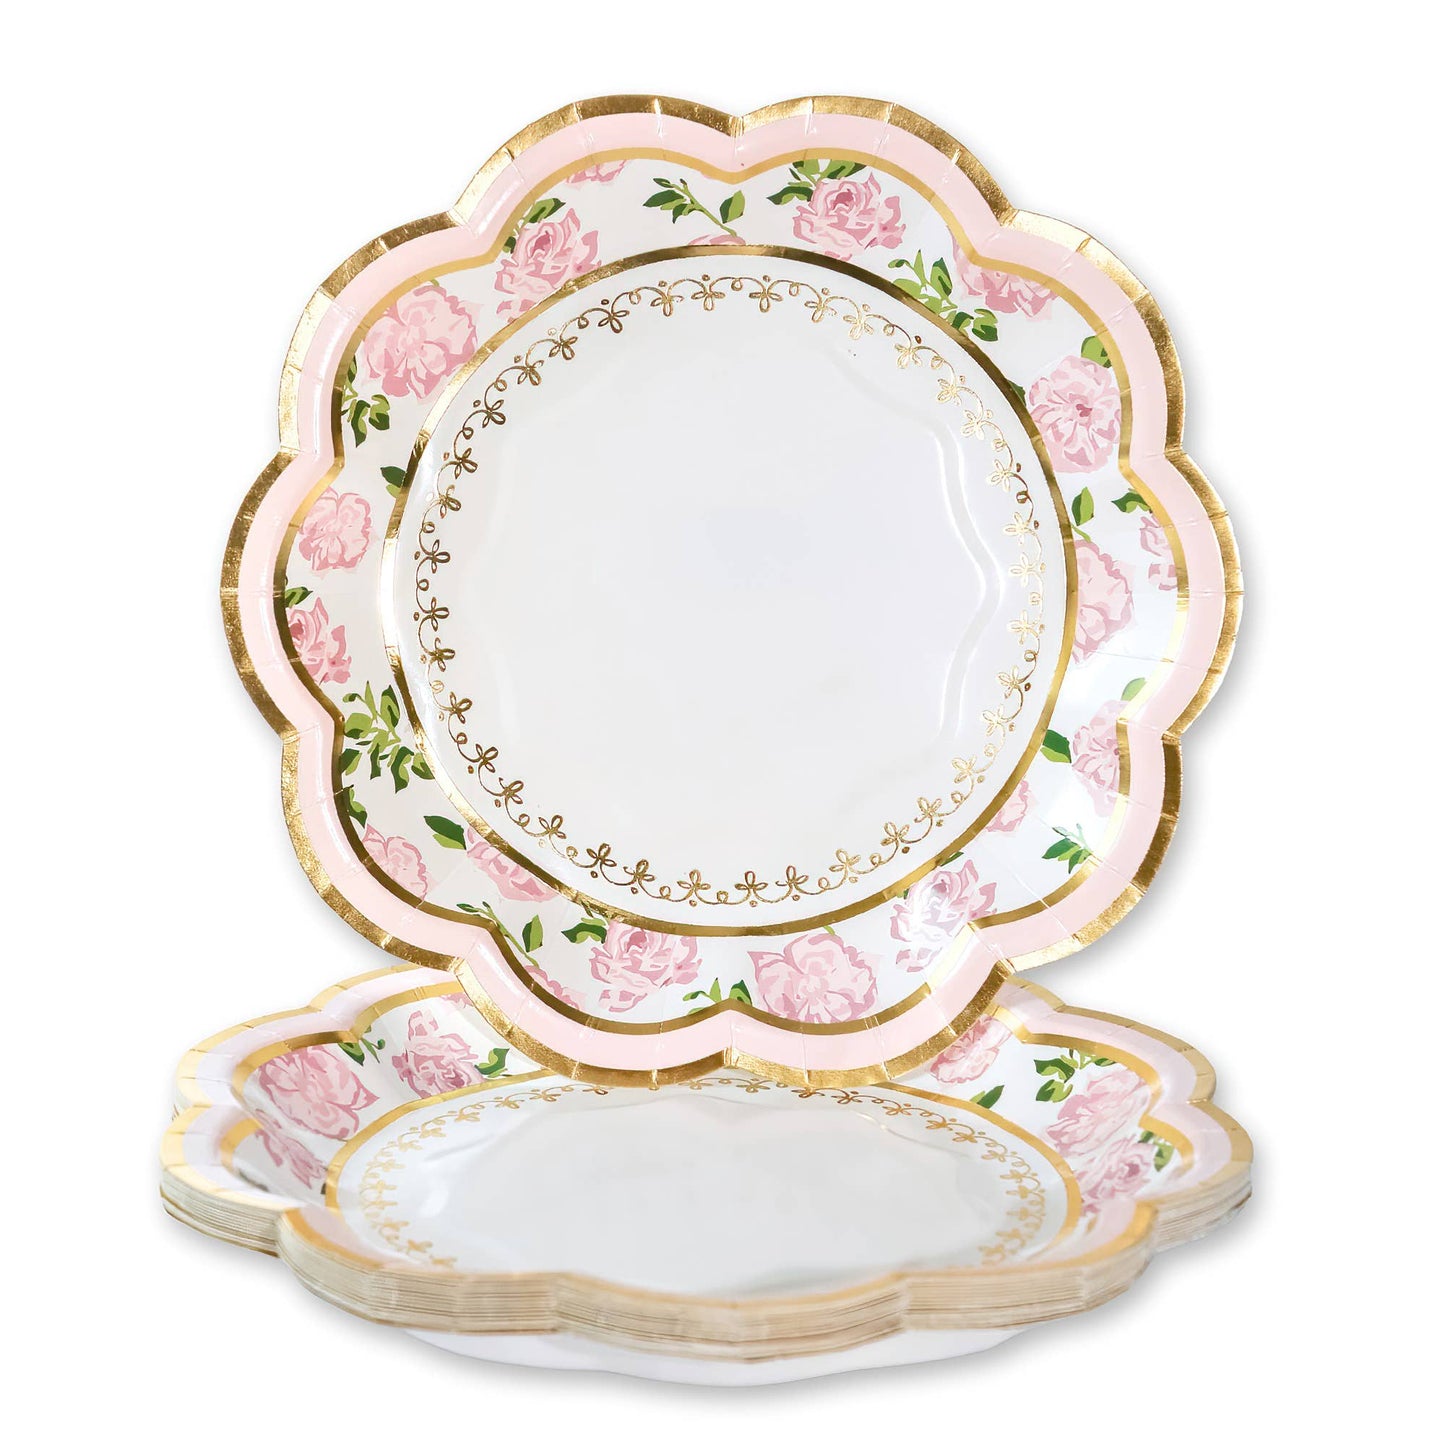 Tea Time Whimsy 7 inch Paper Plates - Pink Set of 16